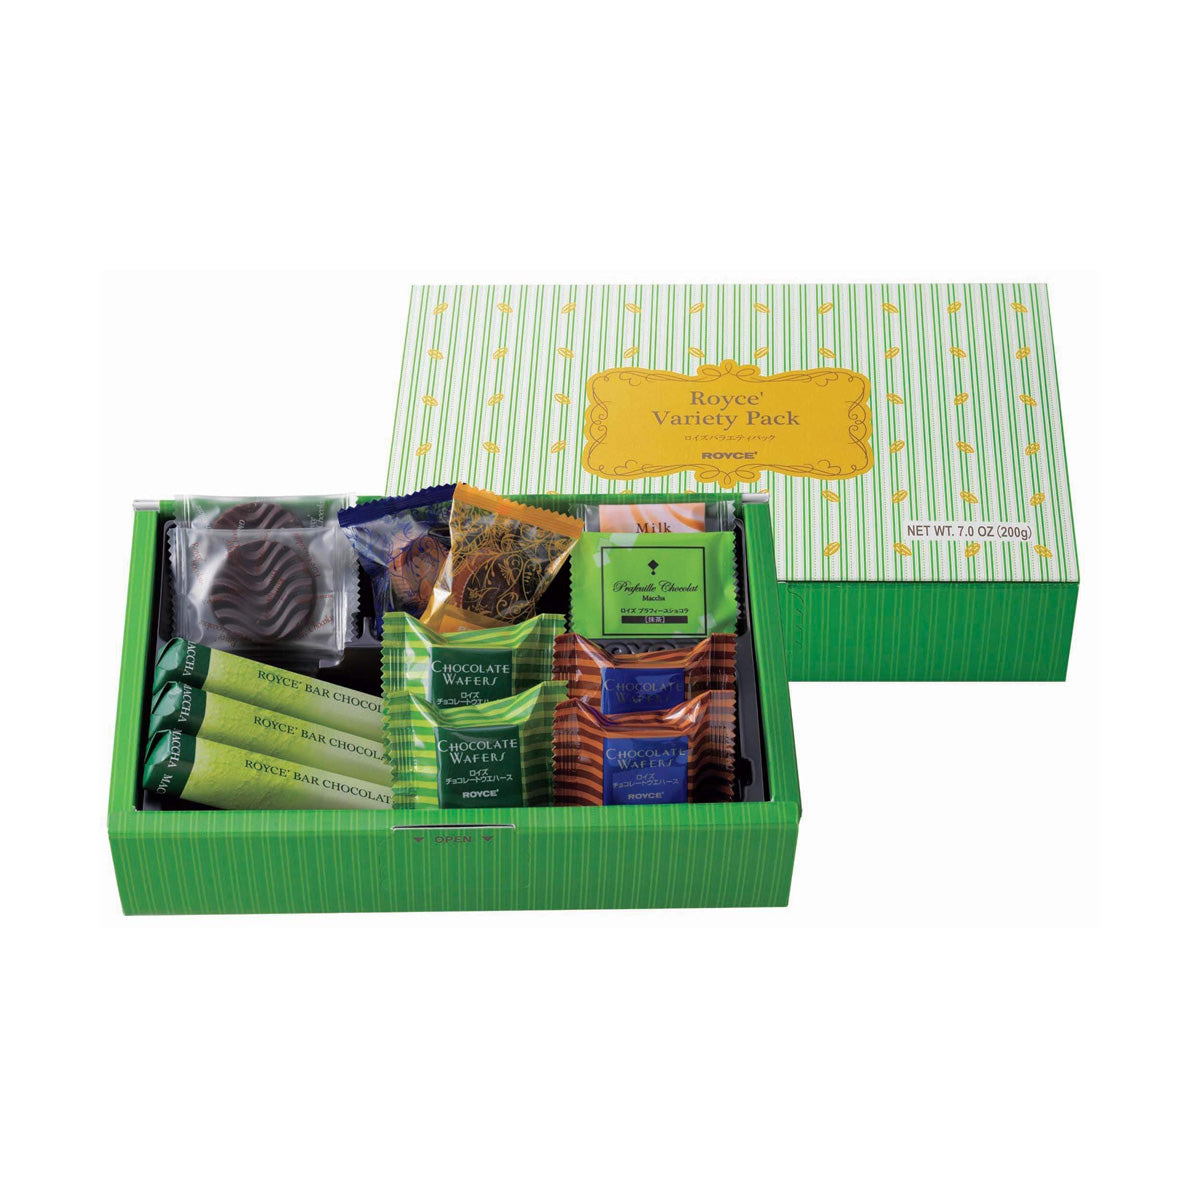 ROYCE' Chocolate - ROYCE' Variety Pack "Flavorful" - Image shows on middle right a green box with leaf prints. Text says ROYCE' Variety Pack ROYCE' Net Wt 7.0 Oz (200g). Below on middle left is an open box with various chocolates in different shapes, sizes, and colors.